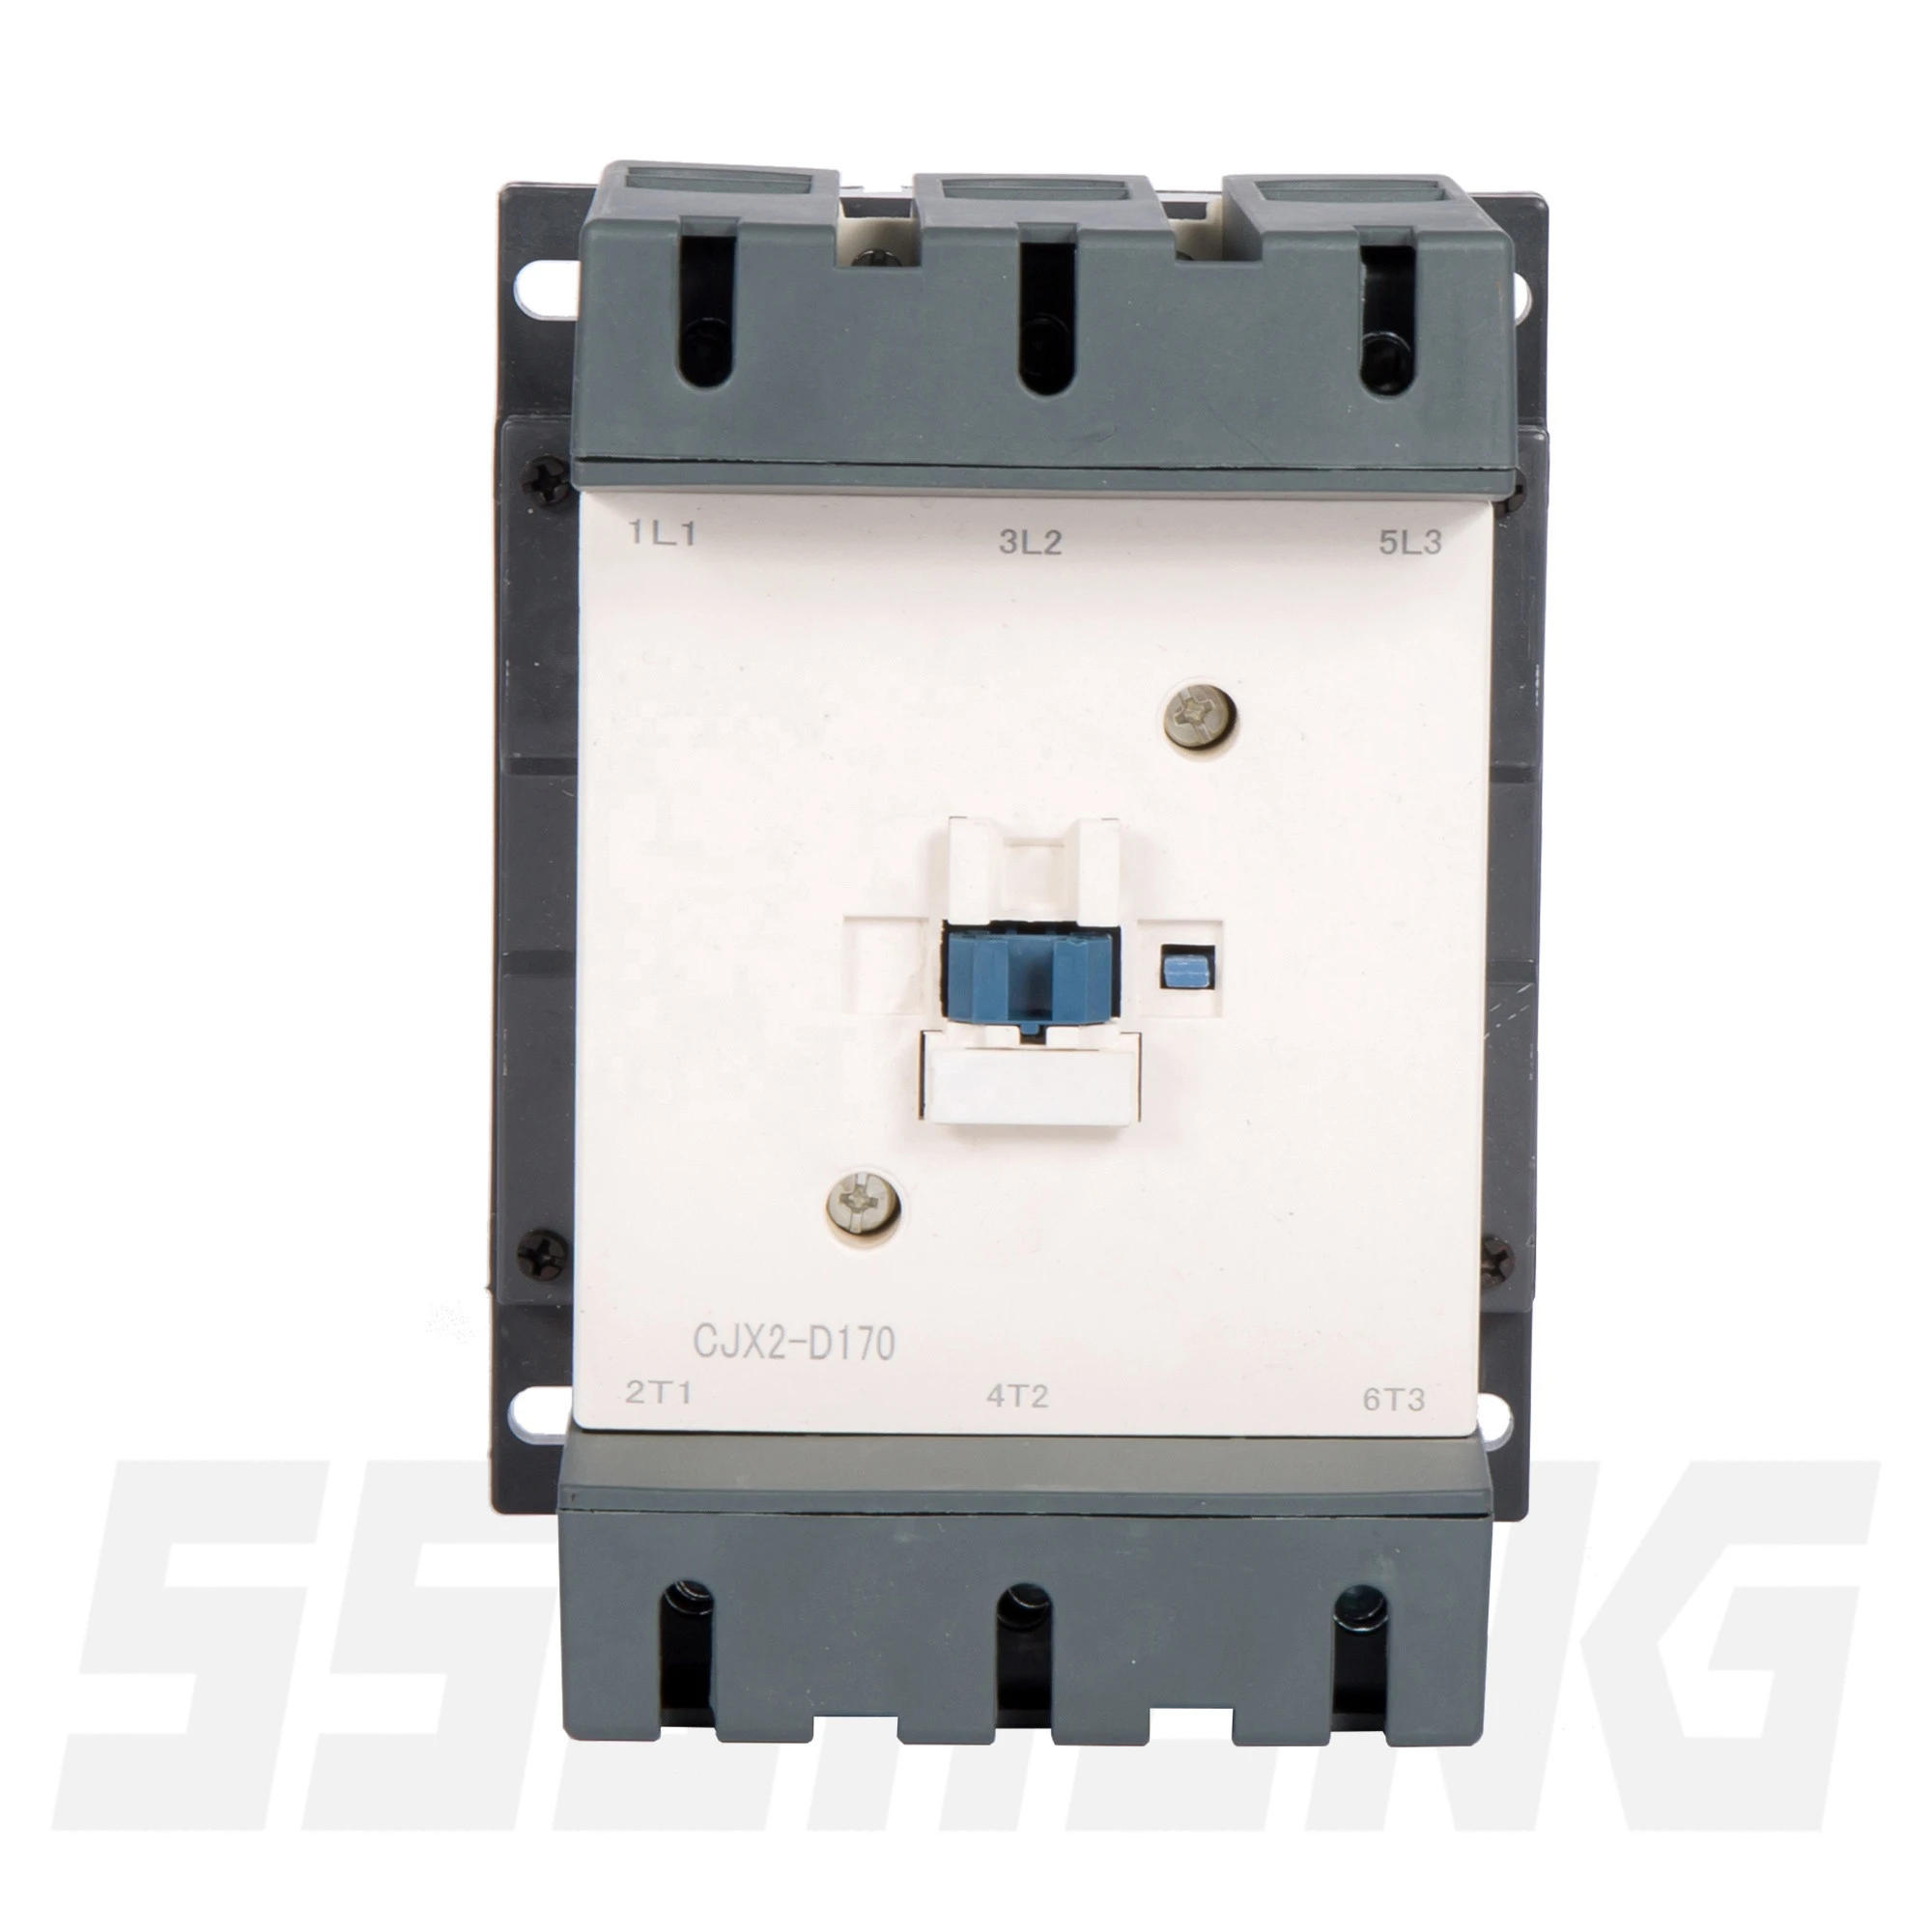 Schneider CXJ2-D Type CJX2-D115 AC Magnetic Contactor Three Phase 115A Electric Contactors